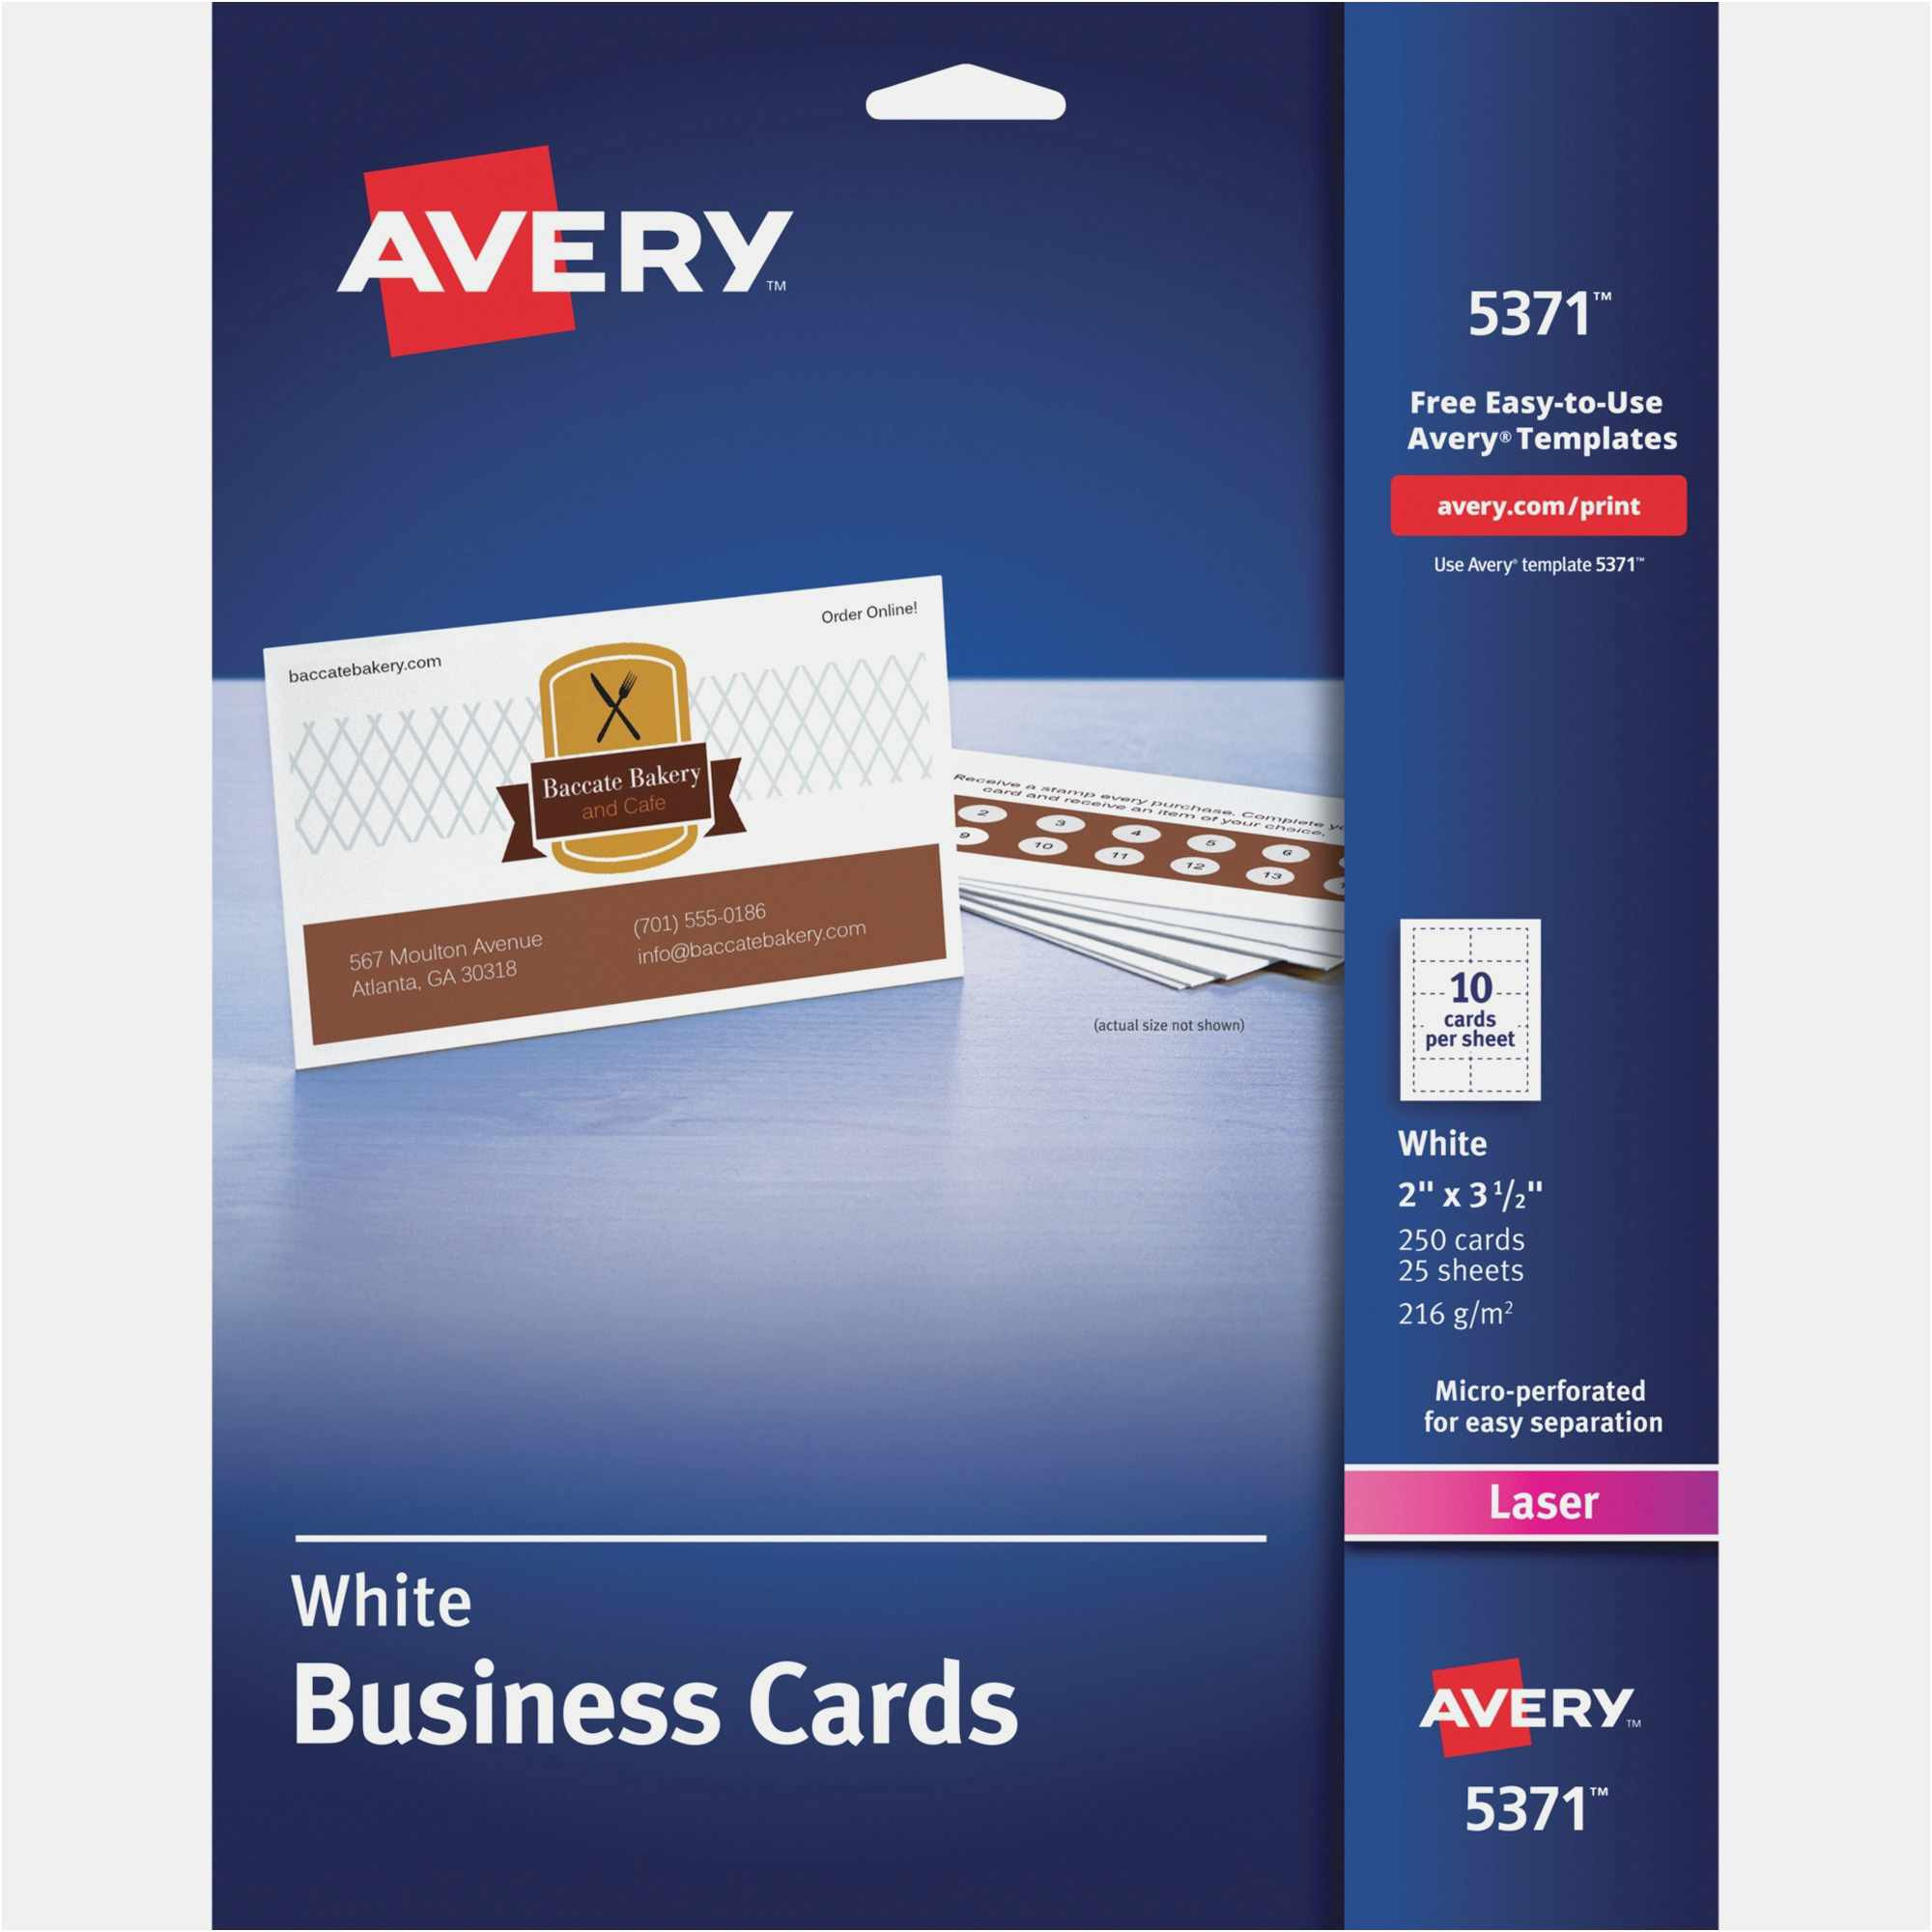 Free Download 60 Avery Business Card Template 5371 2019 Of Avery Business Card Template 8859